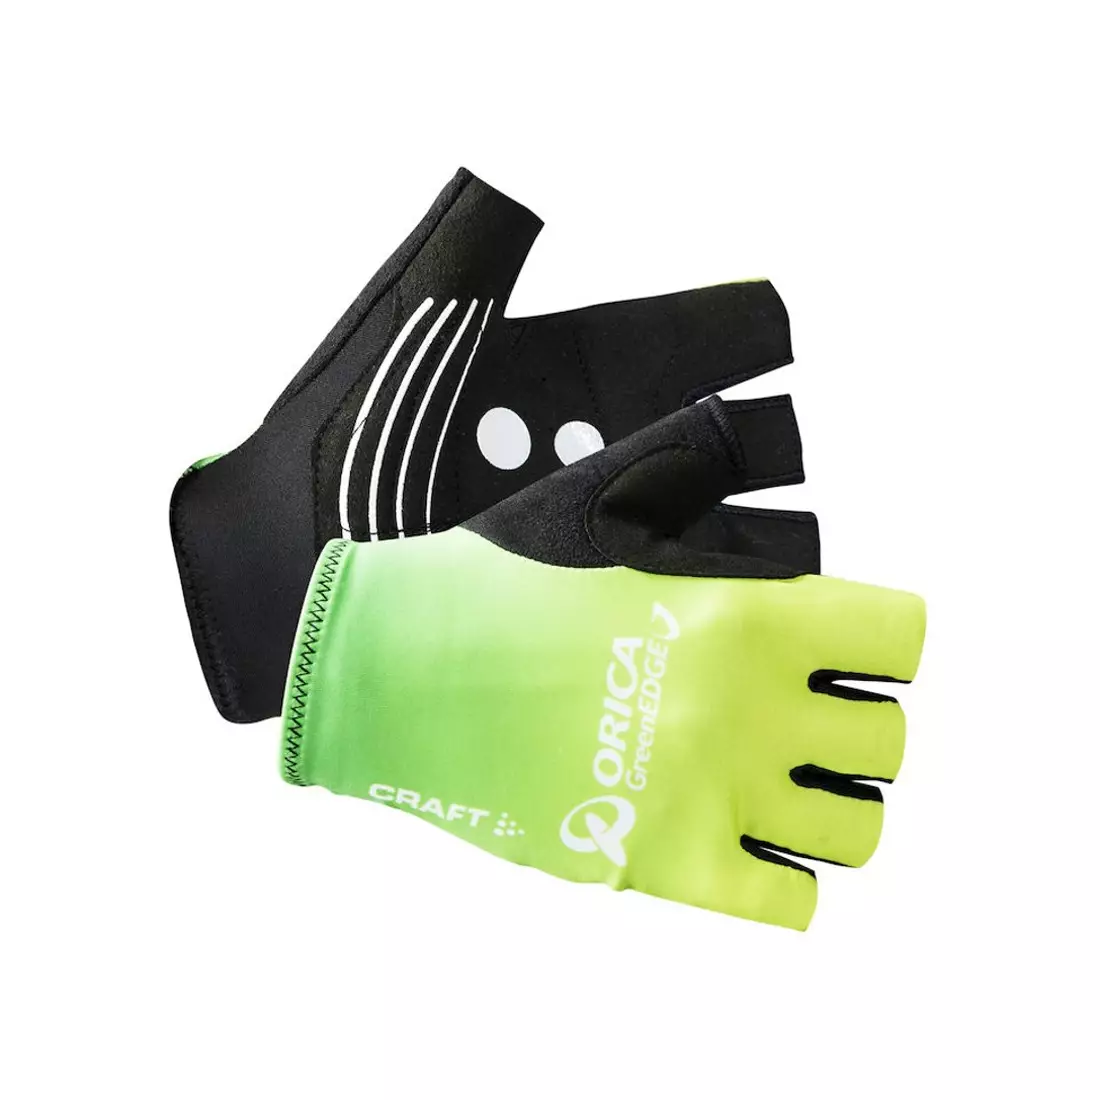 CRAFT ORICA GREEN Edge 2016 cycling gloves 1904469-2900